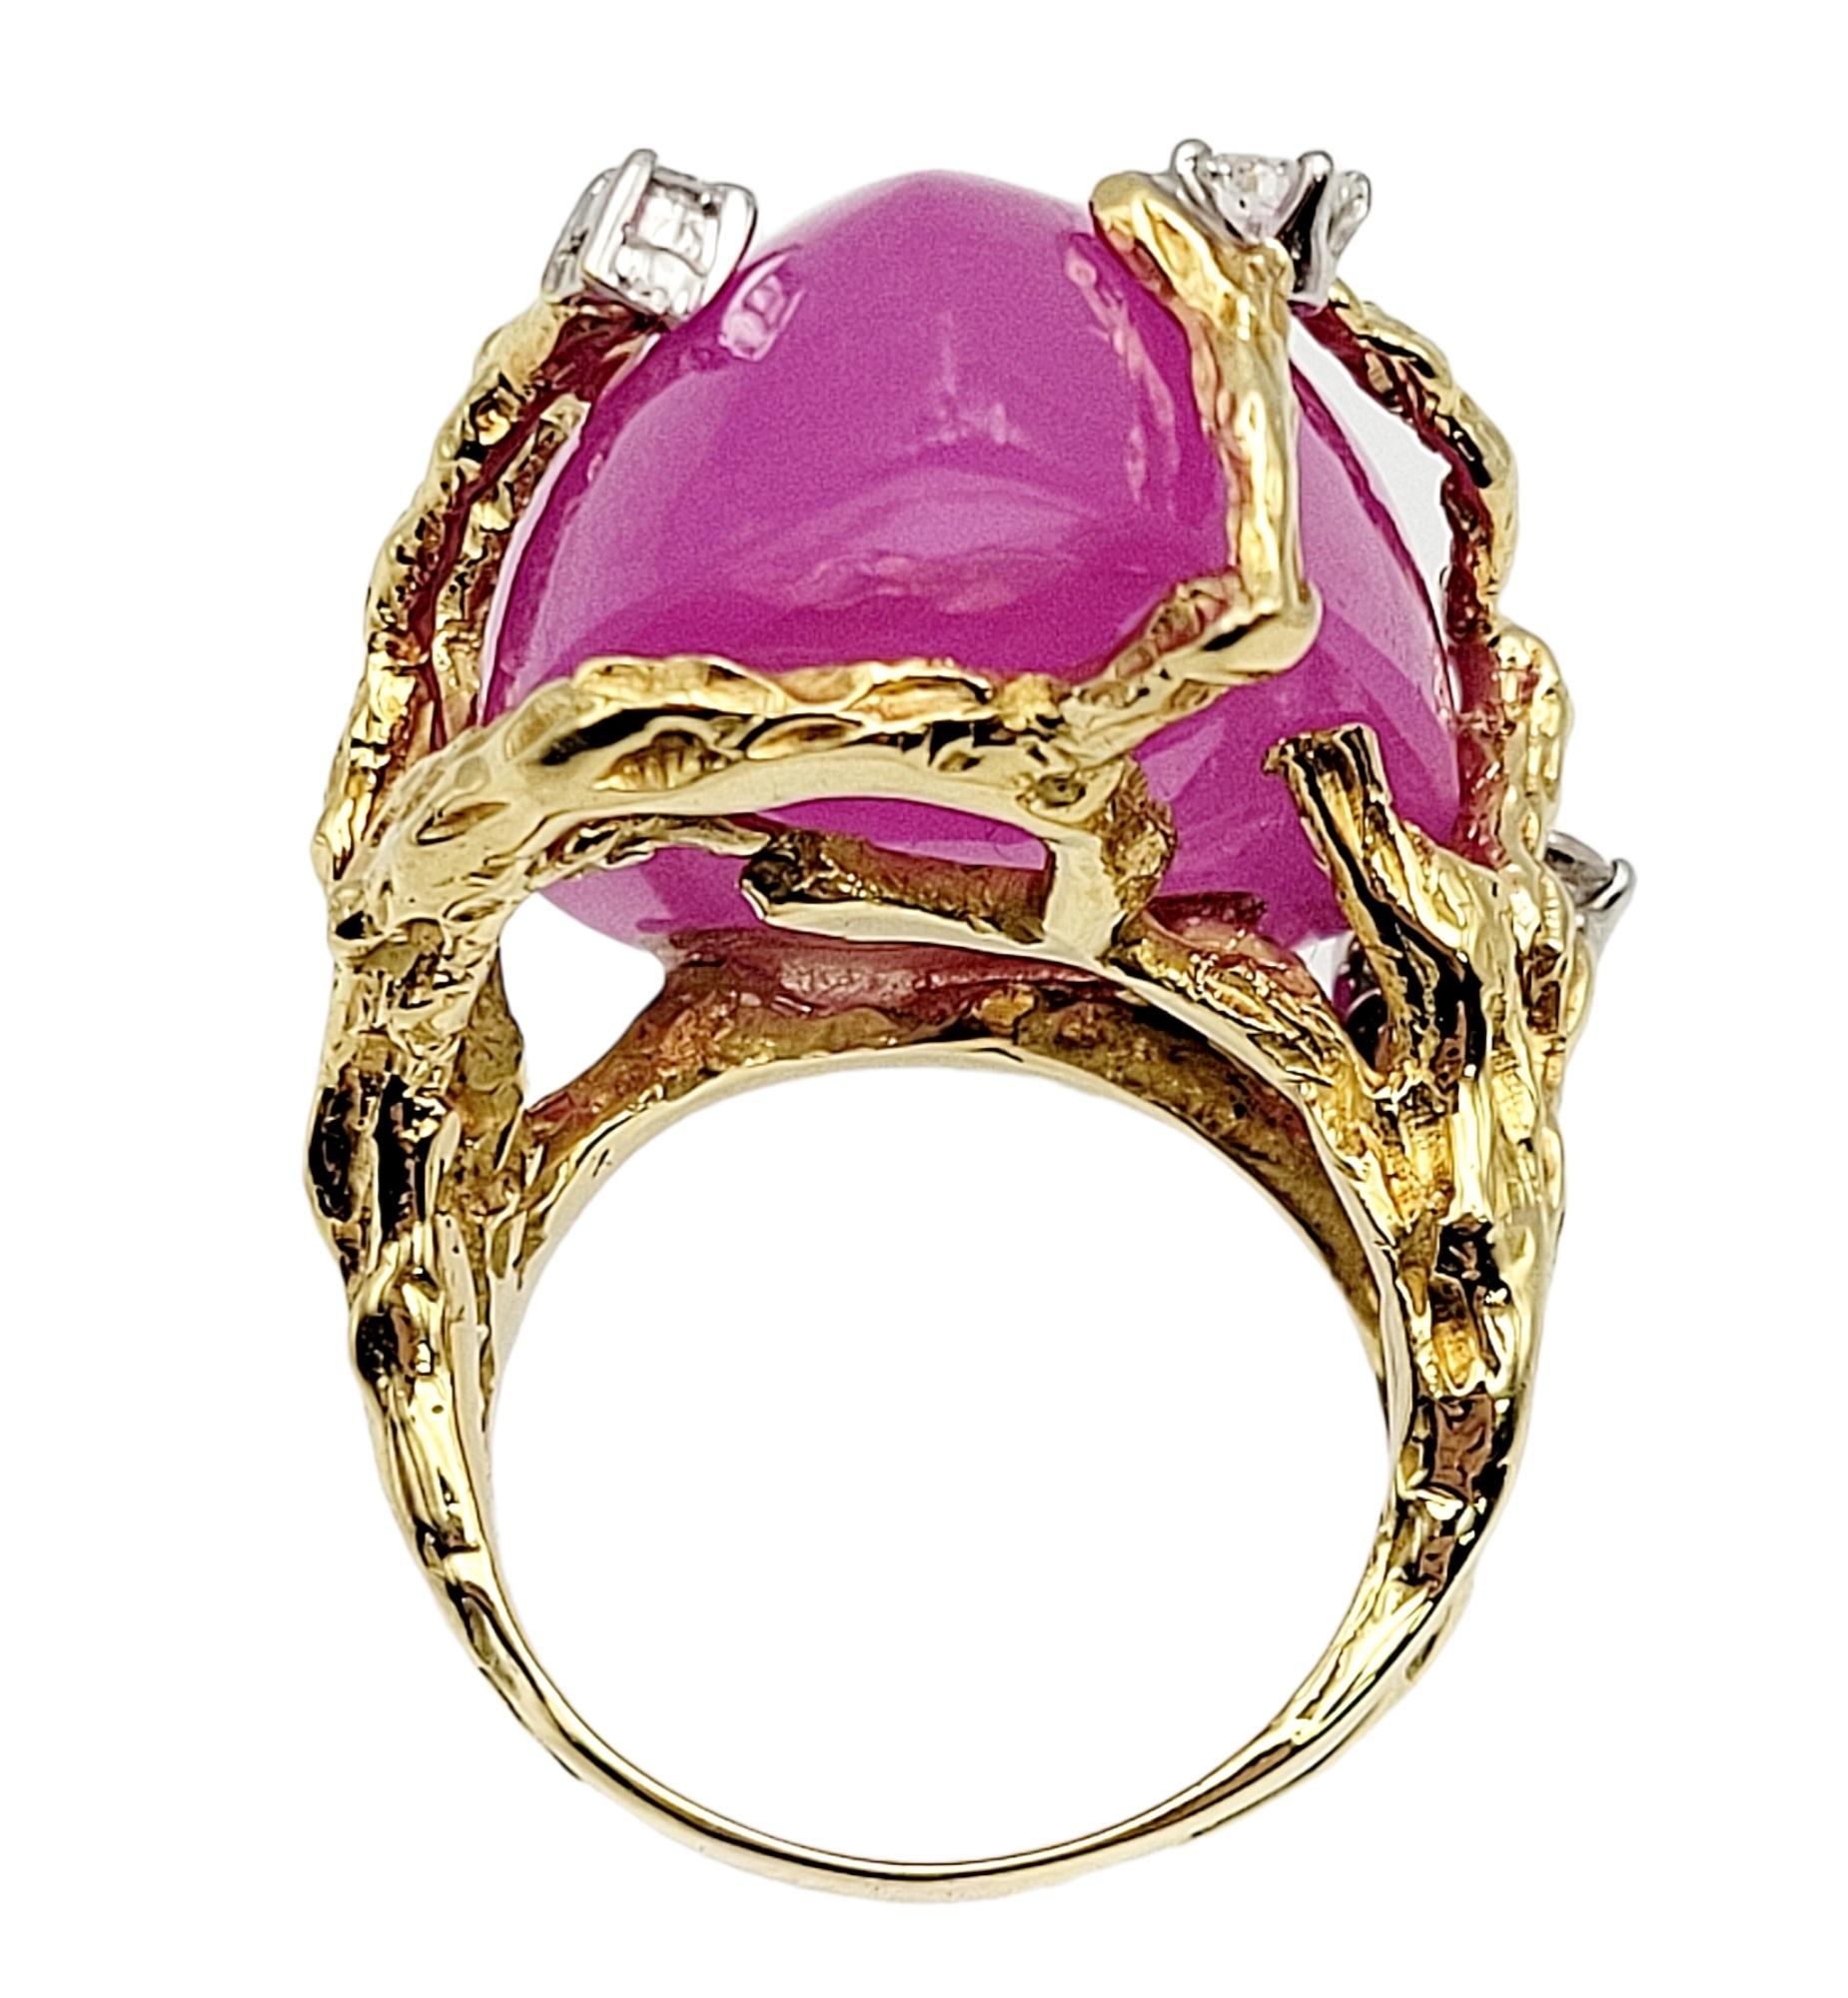 Huge Pear Cabochon Lab Created Pink Sapphire Branch Design Ring in 14 Karat Gold 2